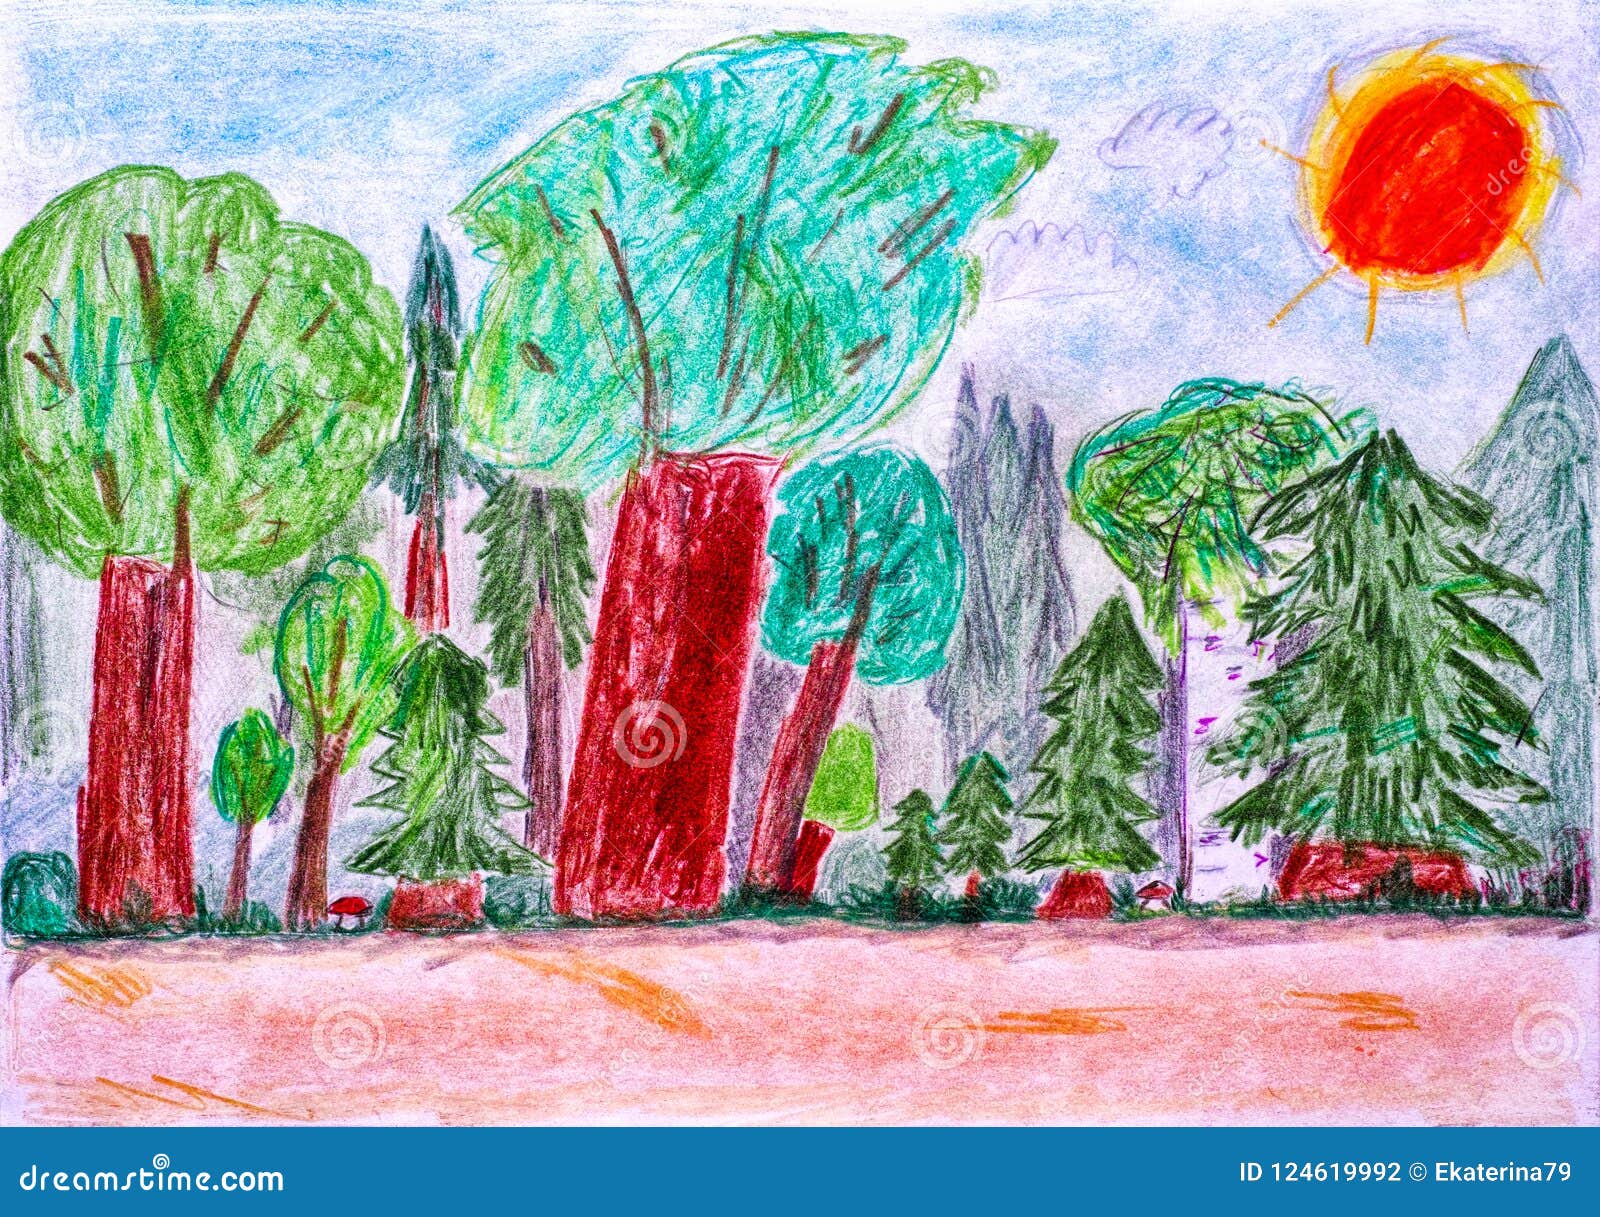 Forest scenery with oil pastel... - Ronaks Drawing & Scenery | Facebook